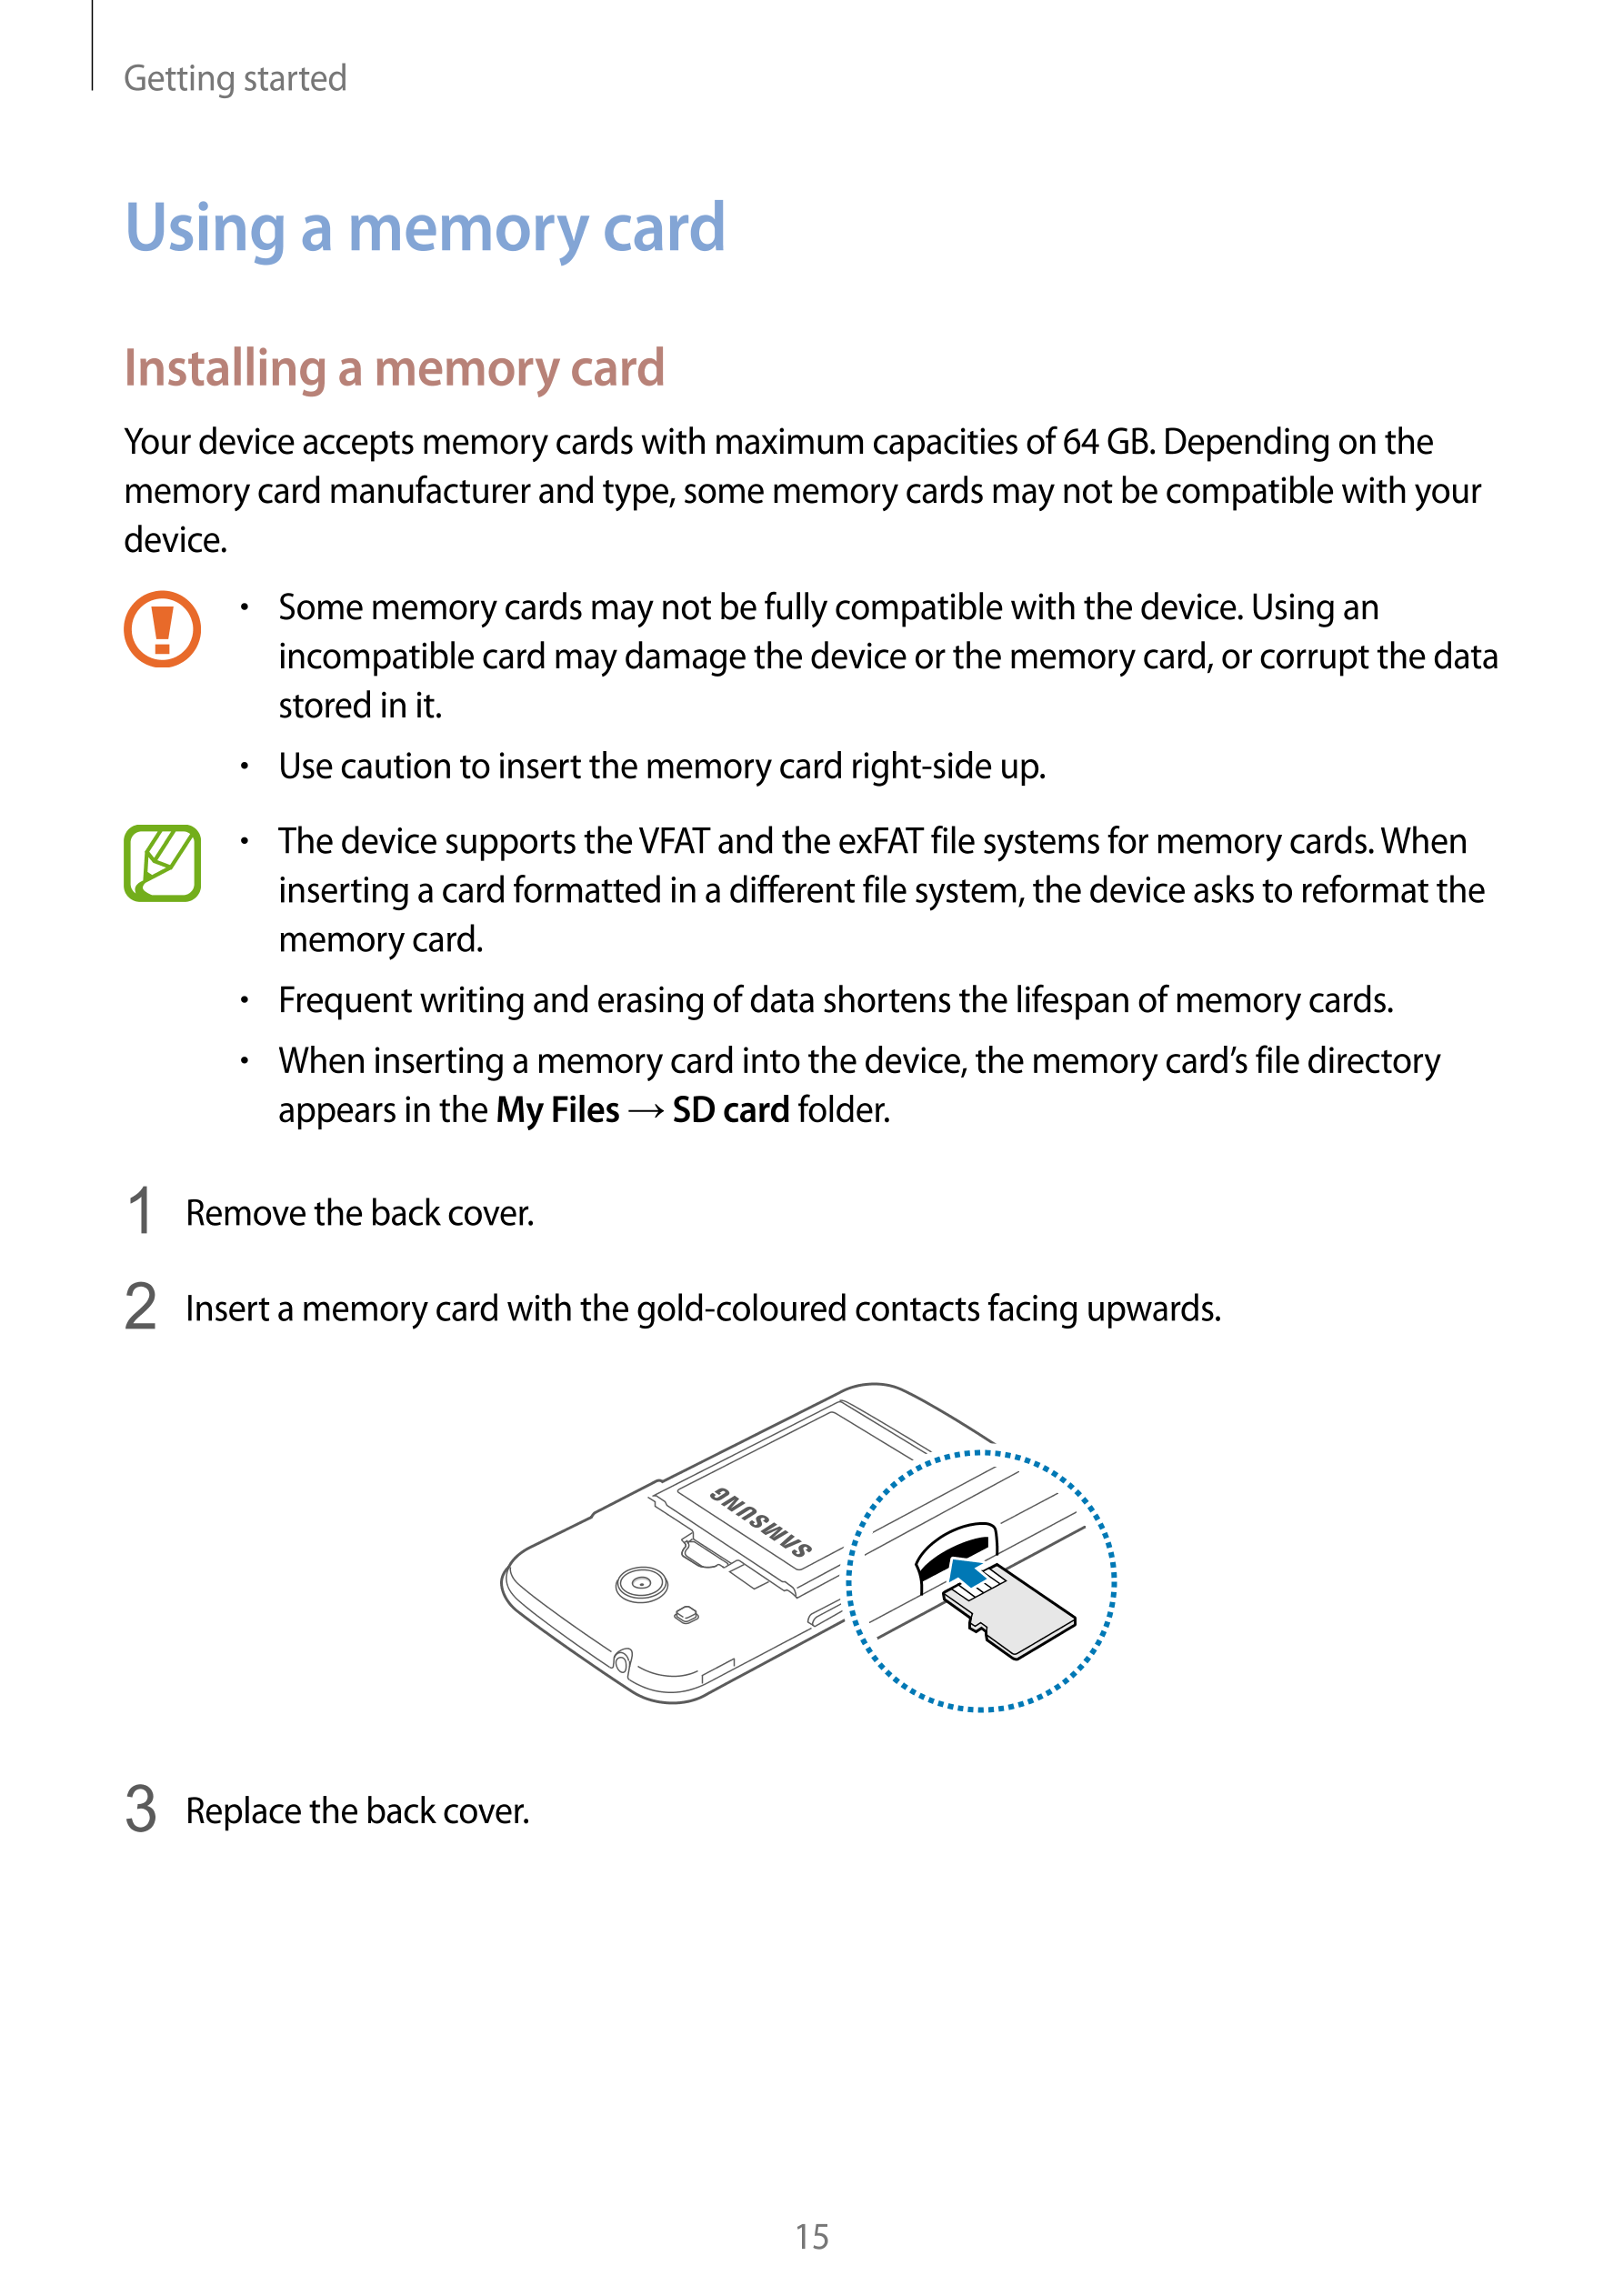 Getting started
Using a memory card
Installing a memory card
Your device accepts memory cards with maximum capacities of 64 GB. 